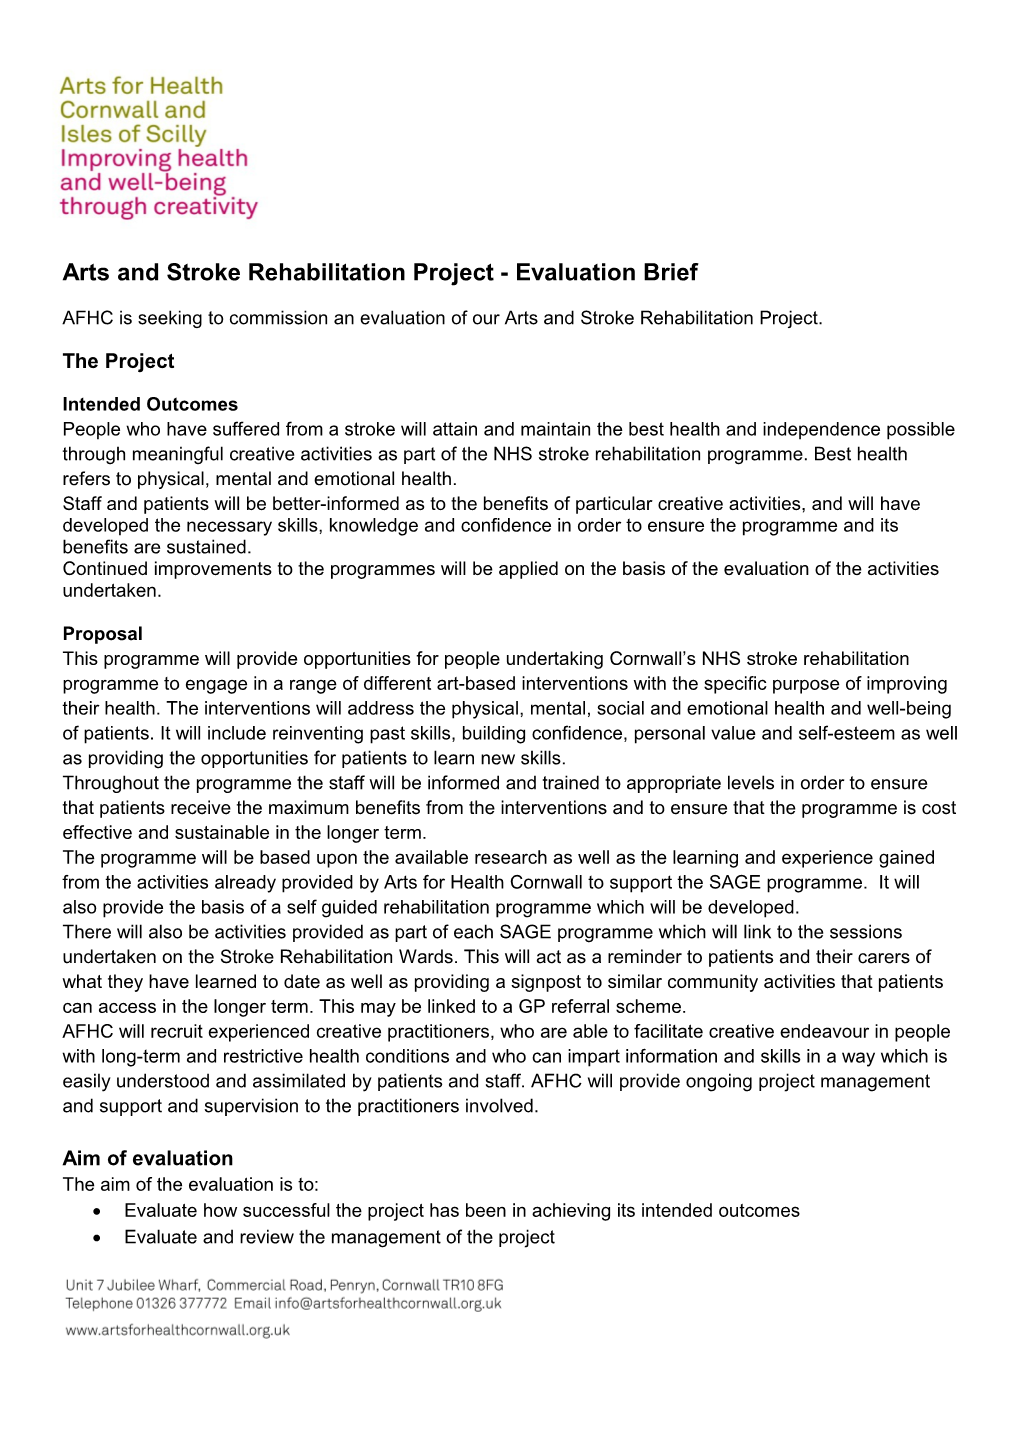 Arts and Stroke Rehabilitation Project - Evaluation Brief